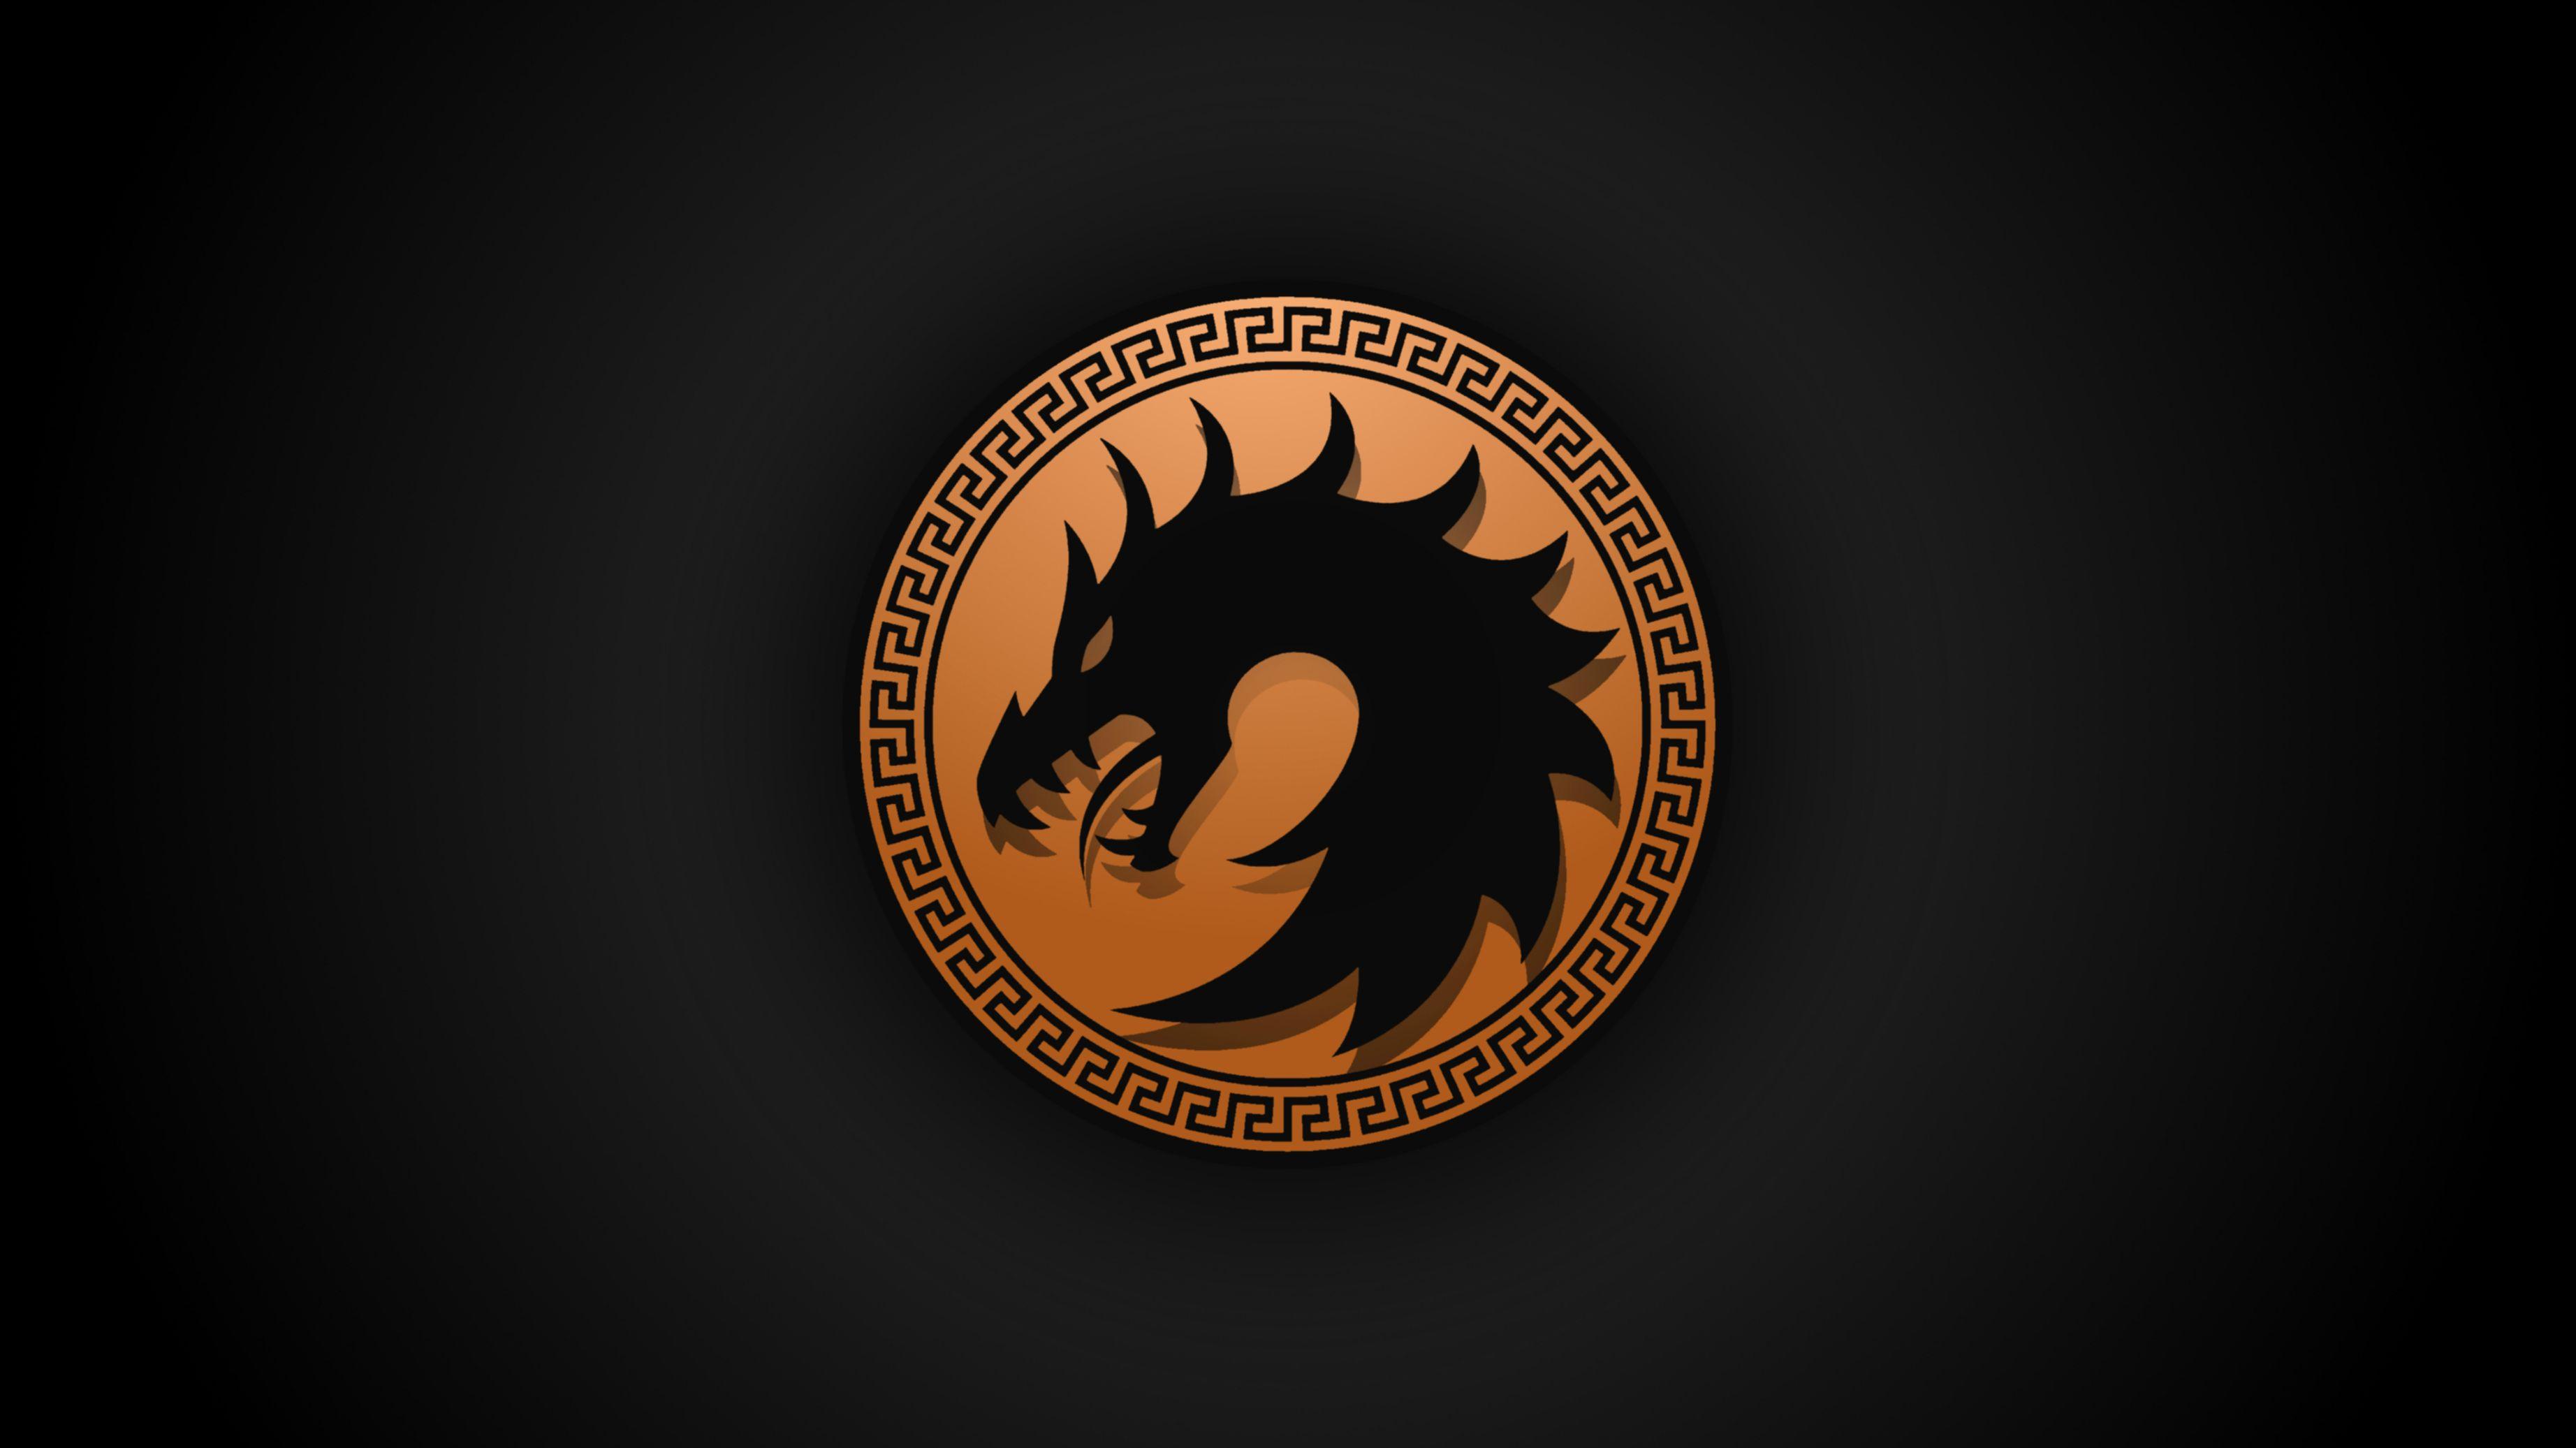 So I made a wallpaper from the Ender's Game Dragon Army logo. How'd